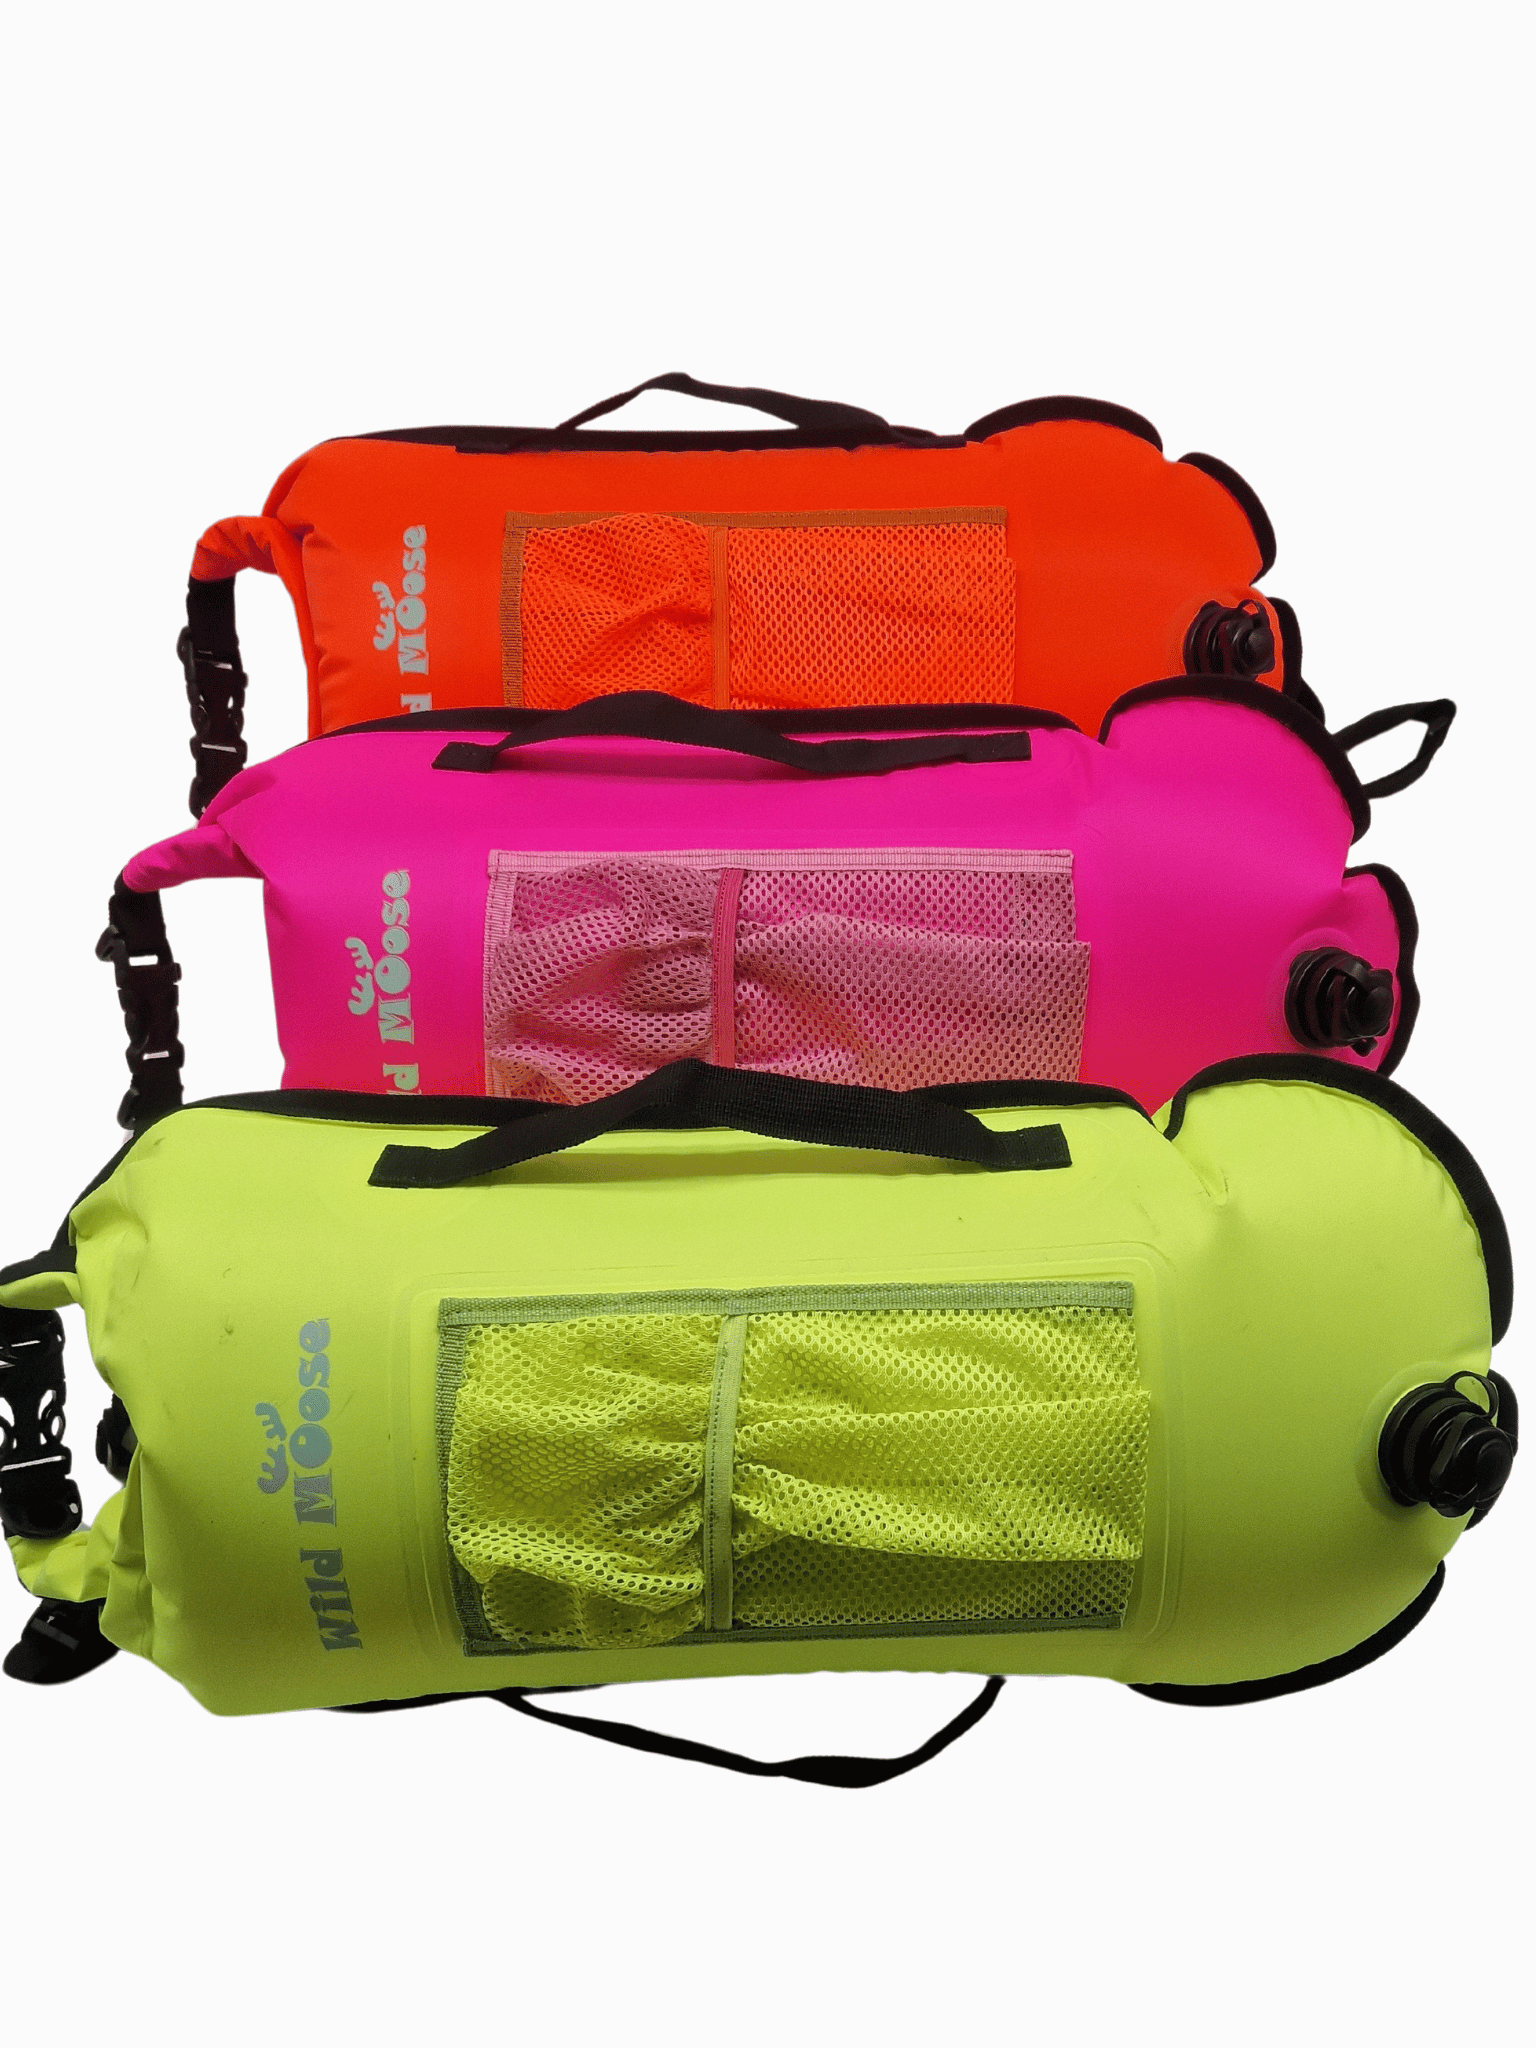 3 tow floats lying on their side: pink, orange and lime coloured